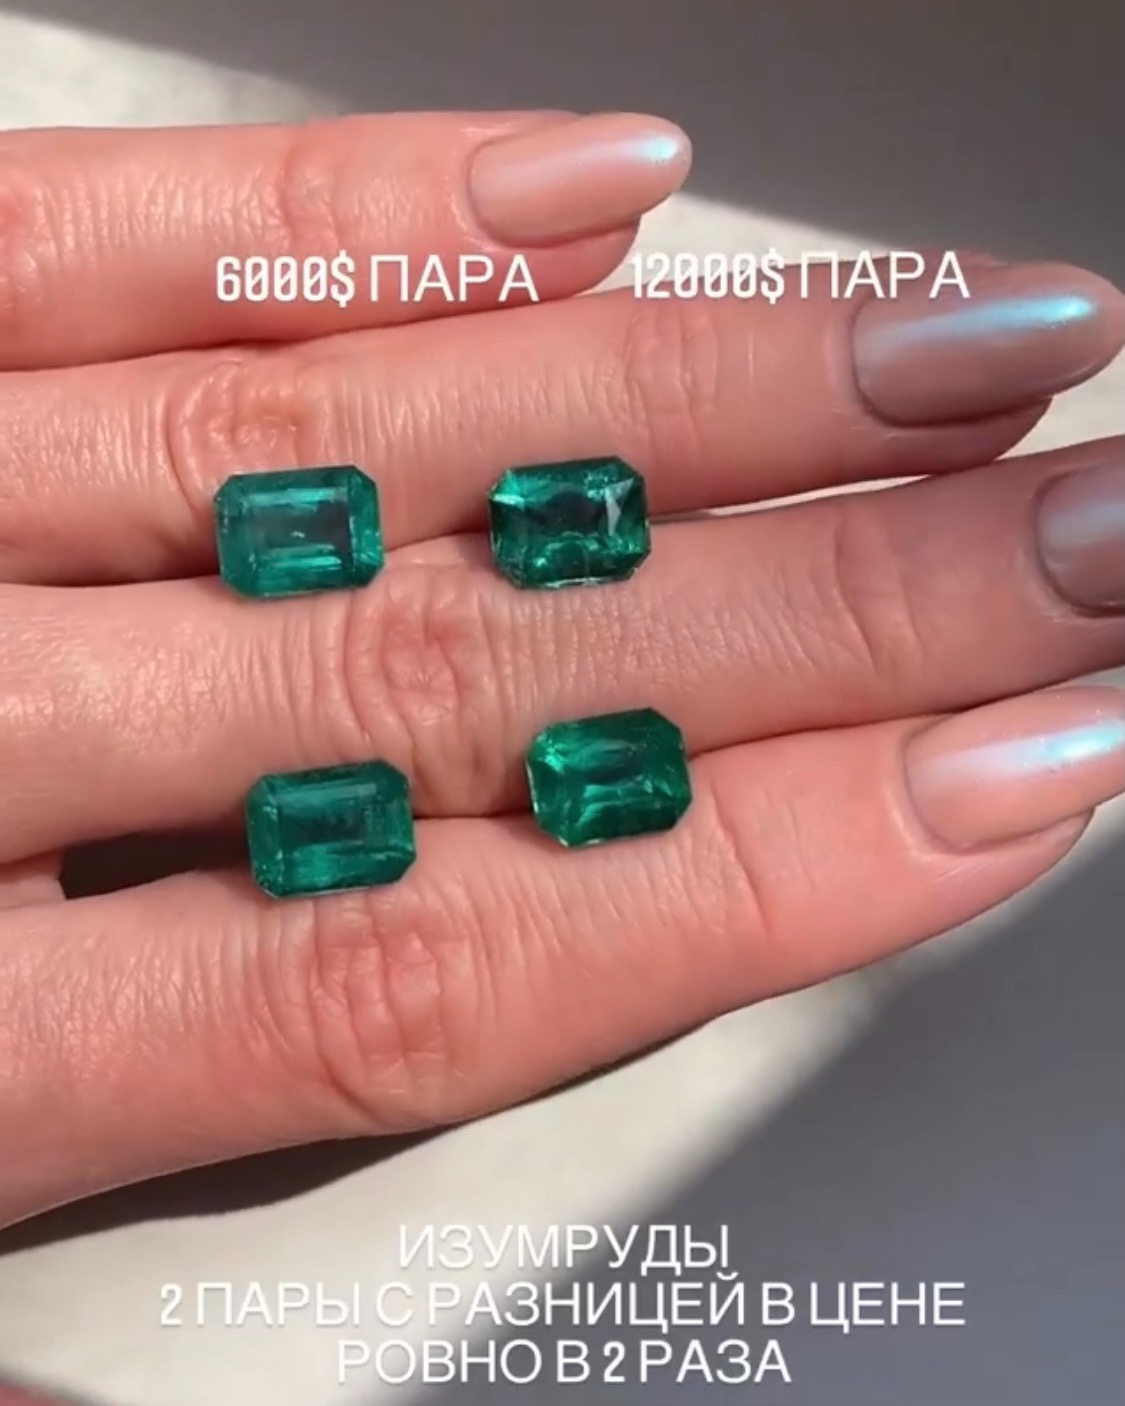 What parameters affect the price of emeralds